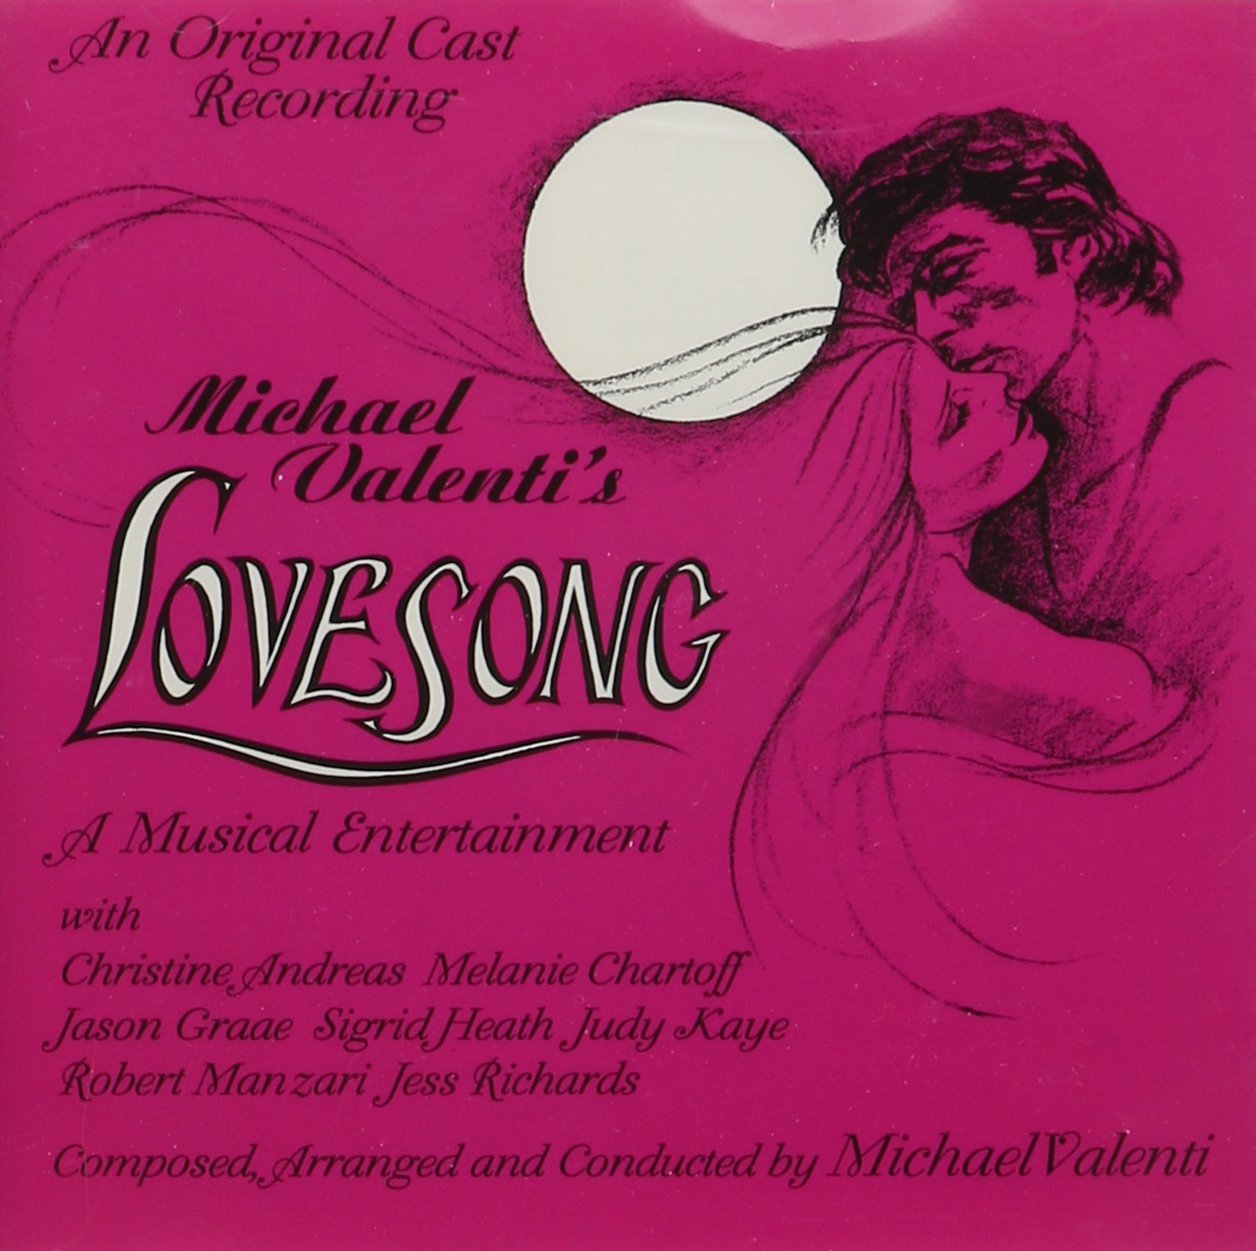 Lovesong: A Musical Entertainment